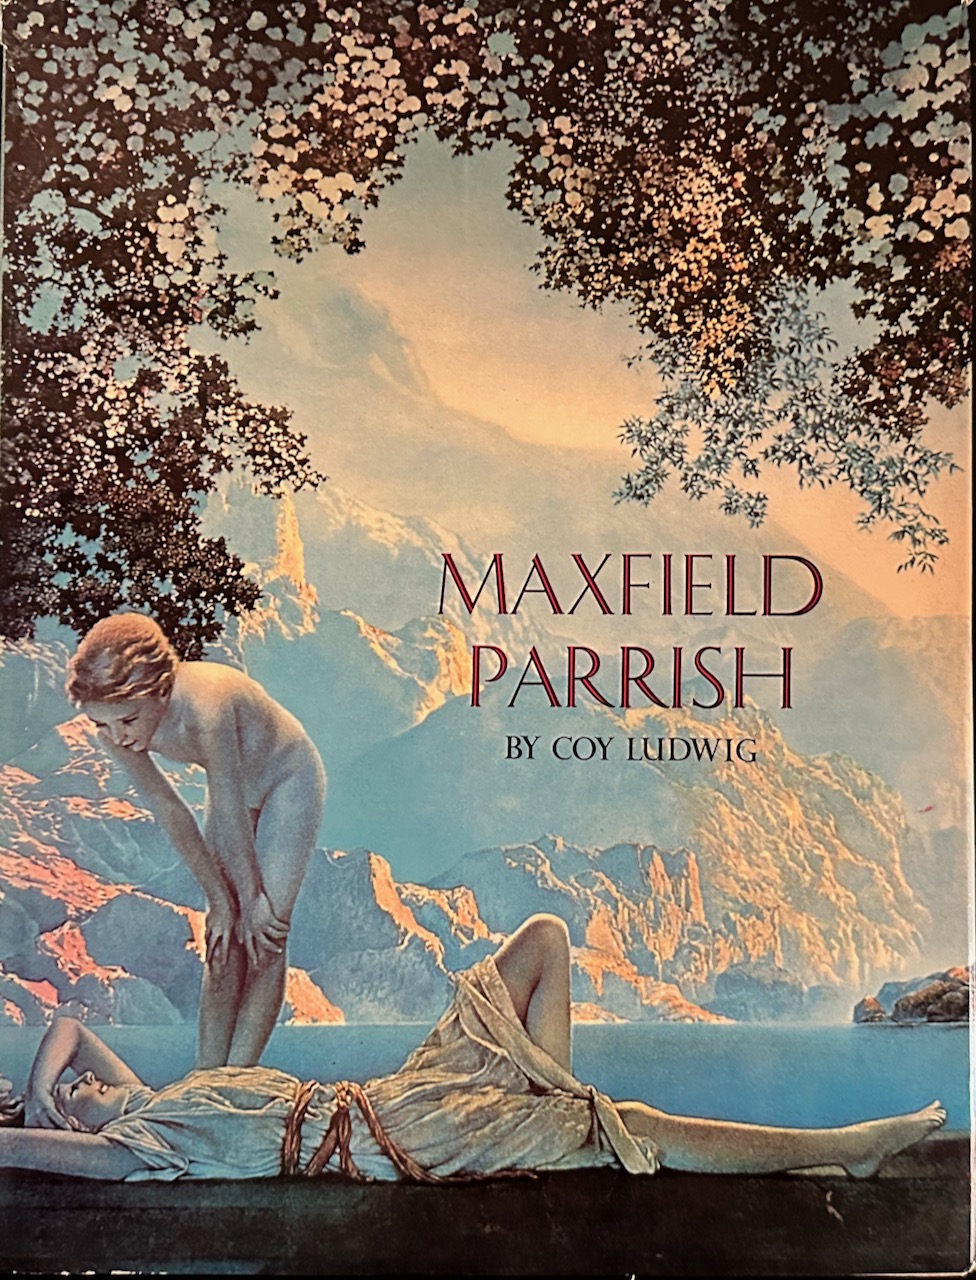 Maxield Parrish by Coy Ludwig